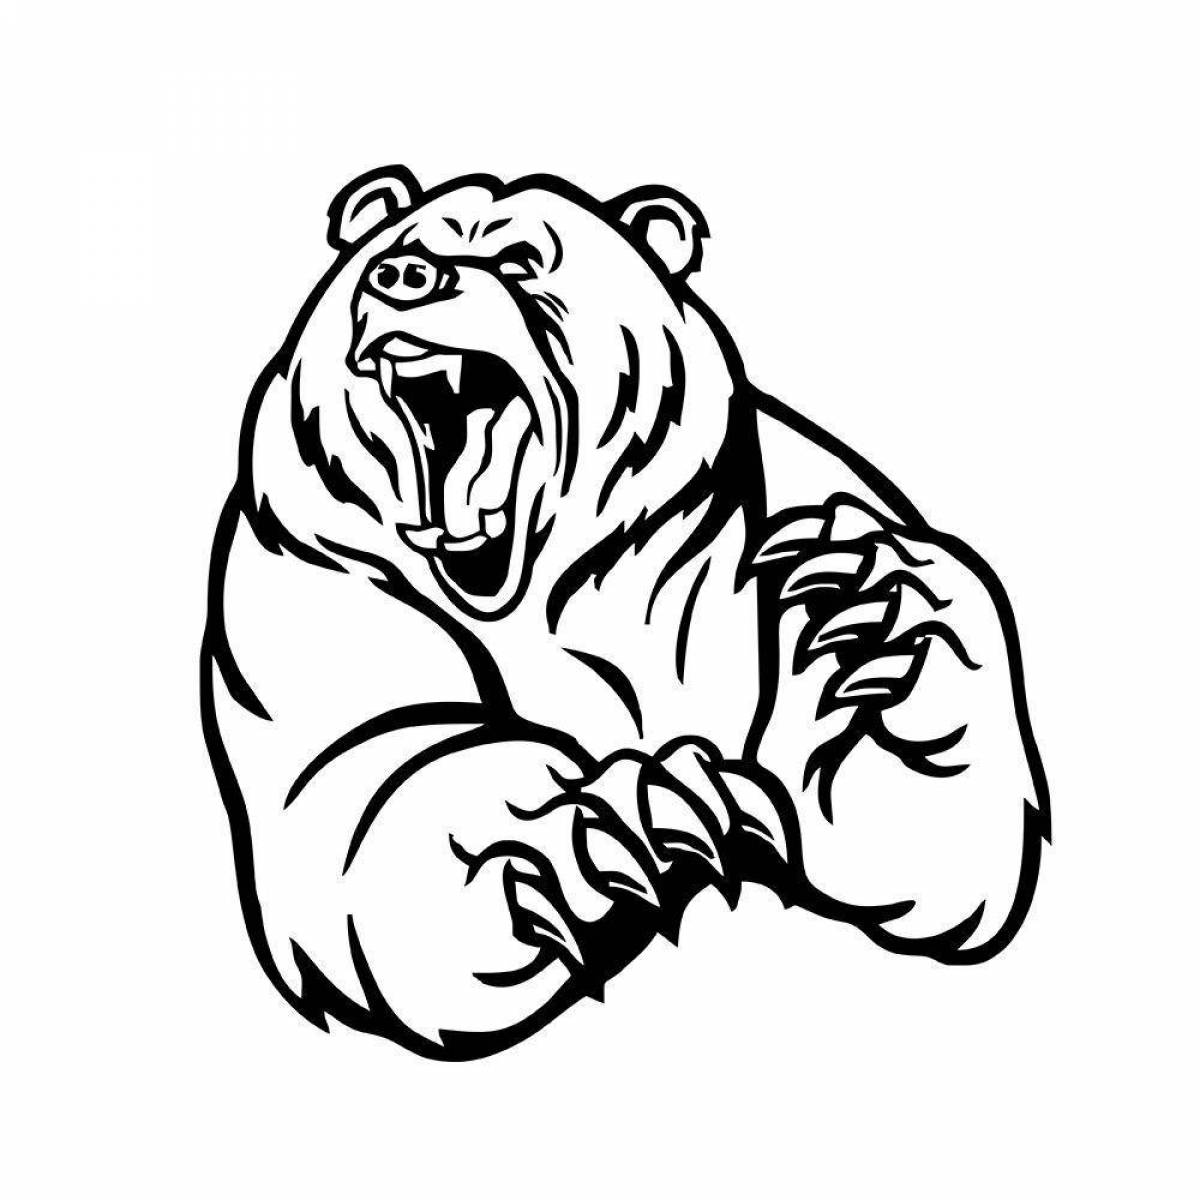 Angry bear growling coloring page